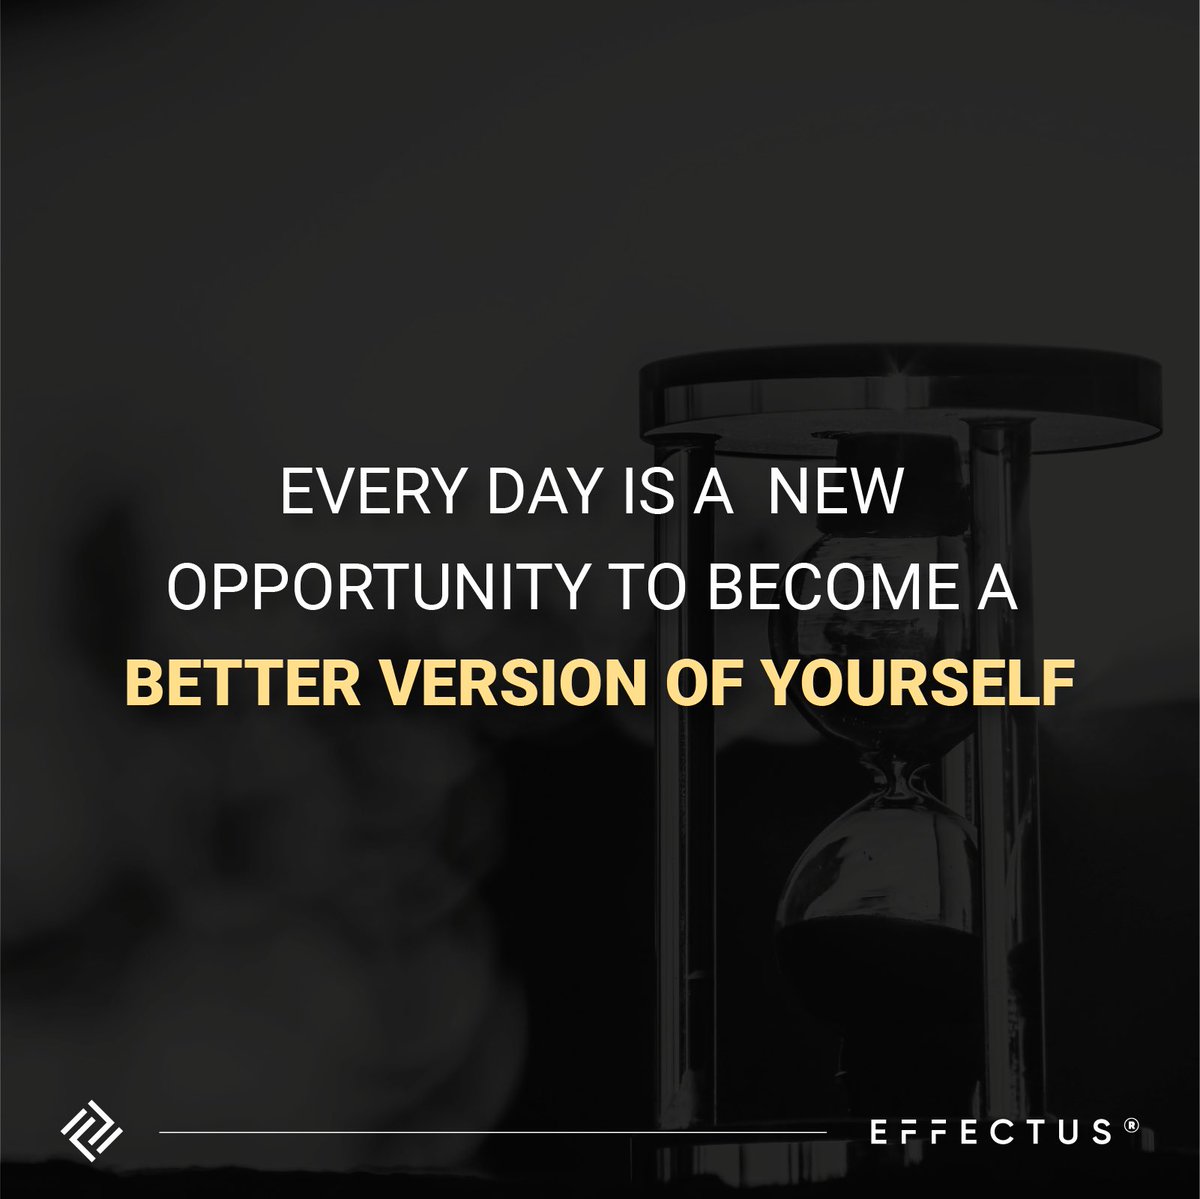 💡 💯 Being your best self is the key to success. #effectus #effectussoftware #keeponcoding #quoteoftheday #motivationalquotes #inspirationalquotes #lifequotes #quotesgram #successquotes #quotestagram #motivation101 #motivationalwords